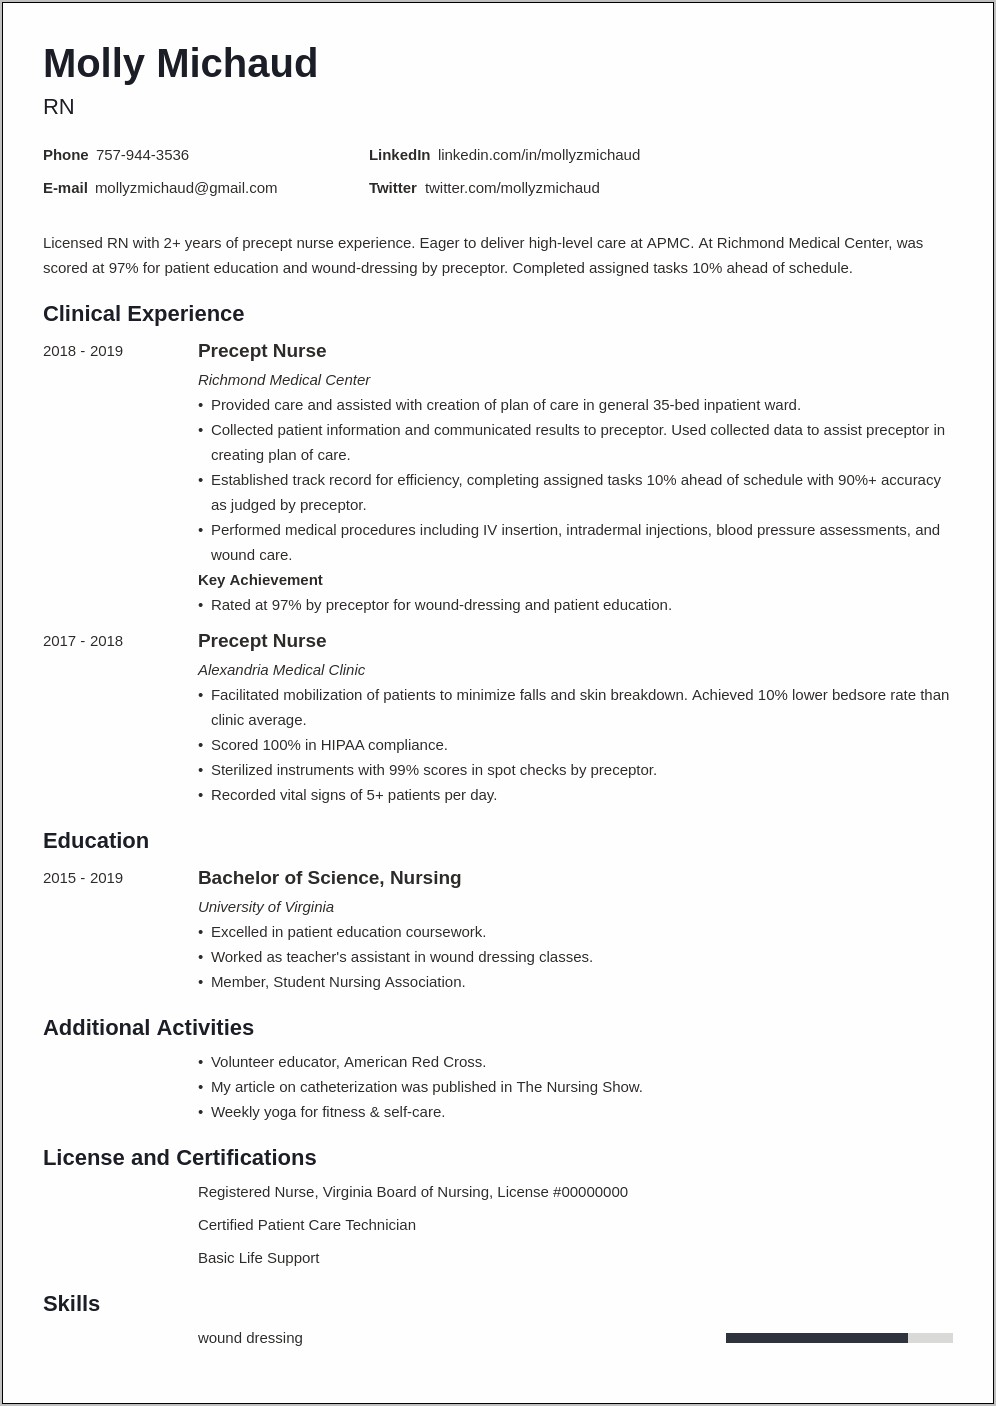 Nursing Resume With One Year Experience